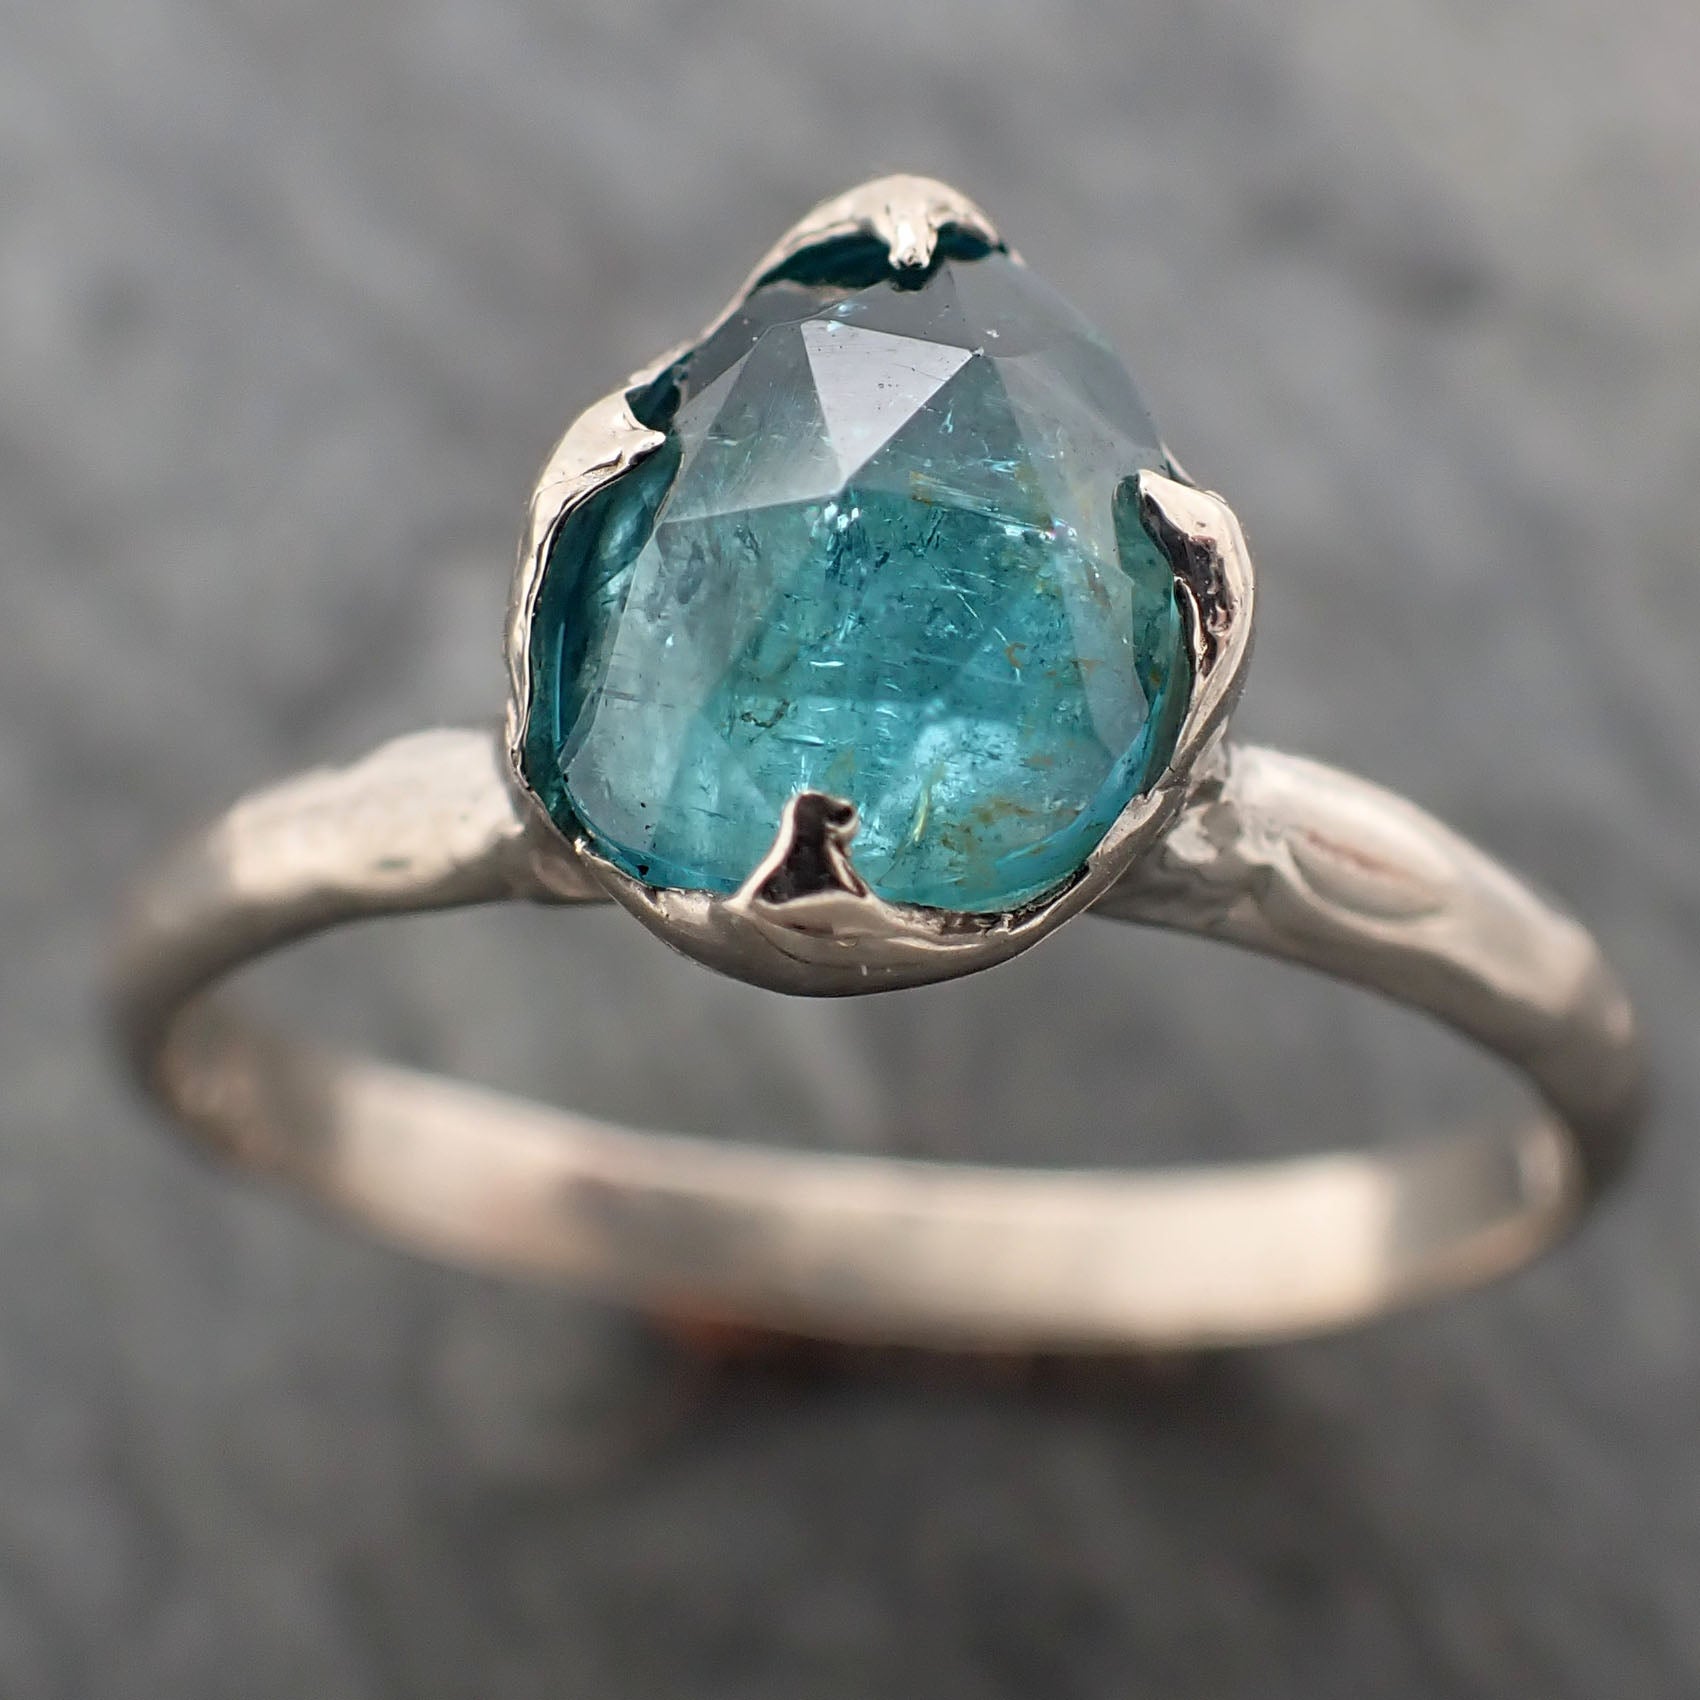 fancy cut blue tourmaline white gold ring gemstone solitaire recycled 14k statement 2331 Alternative Engagement